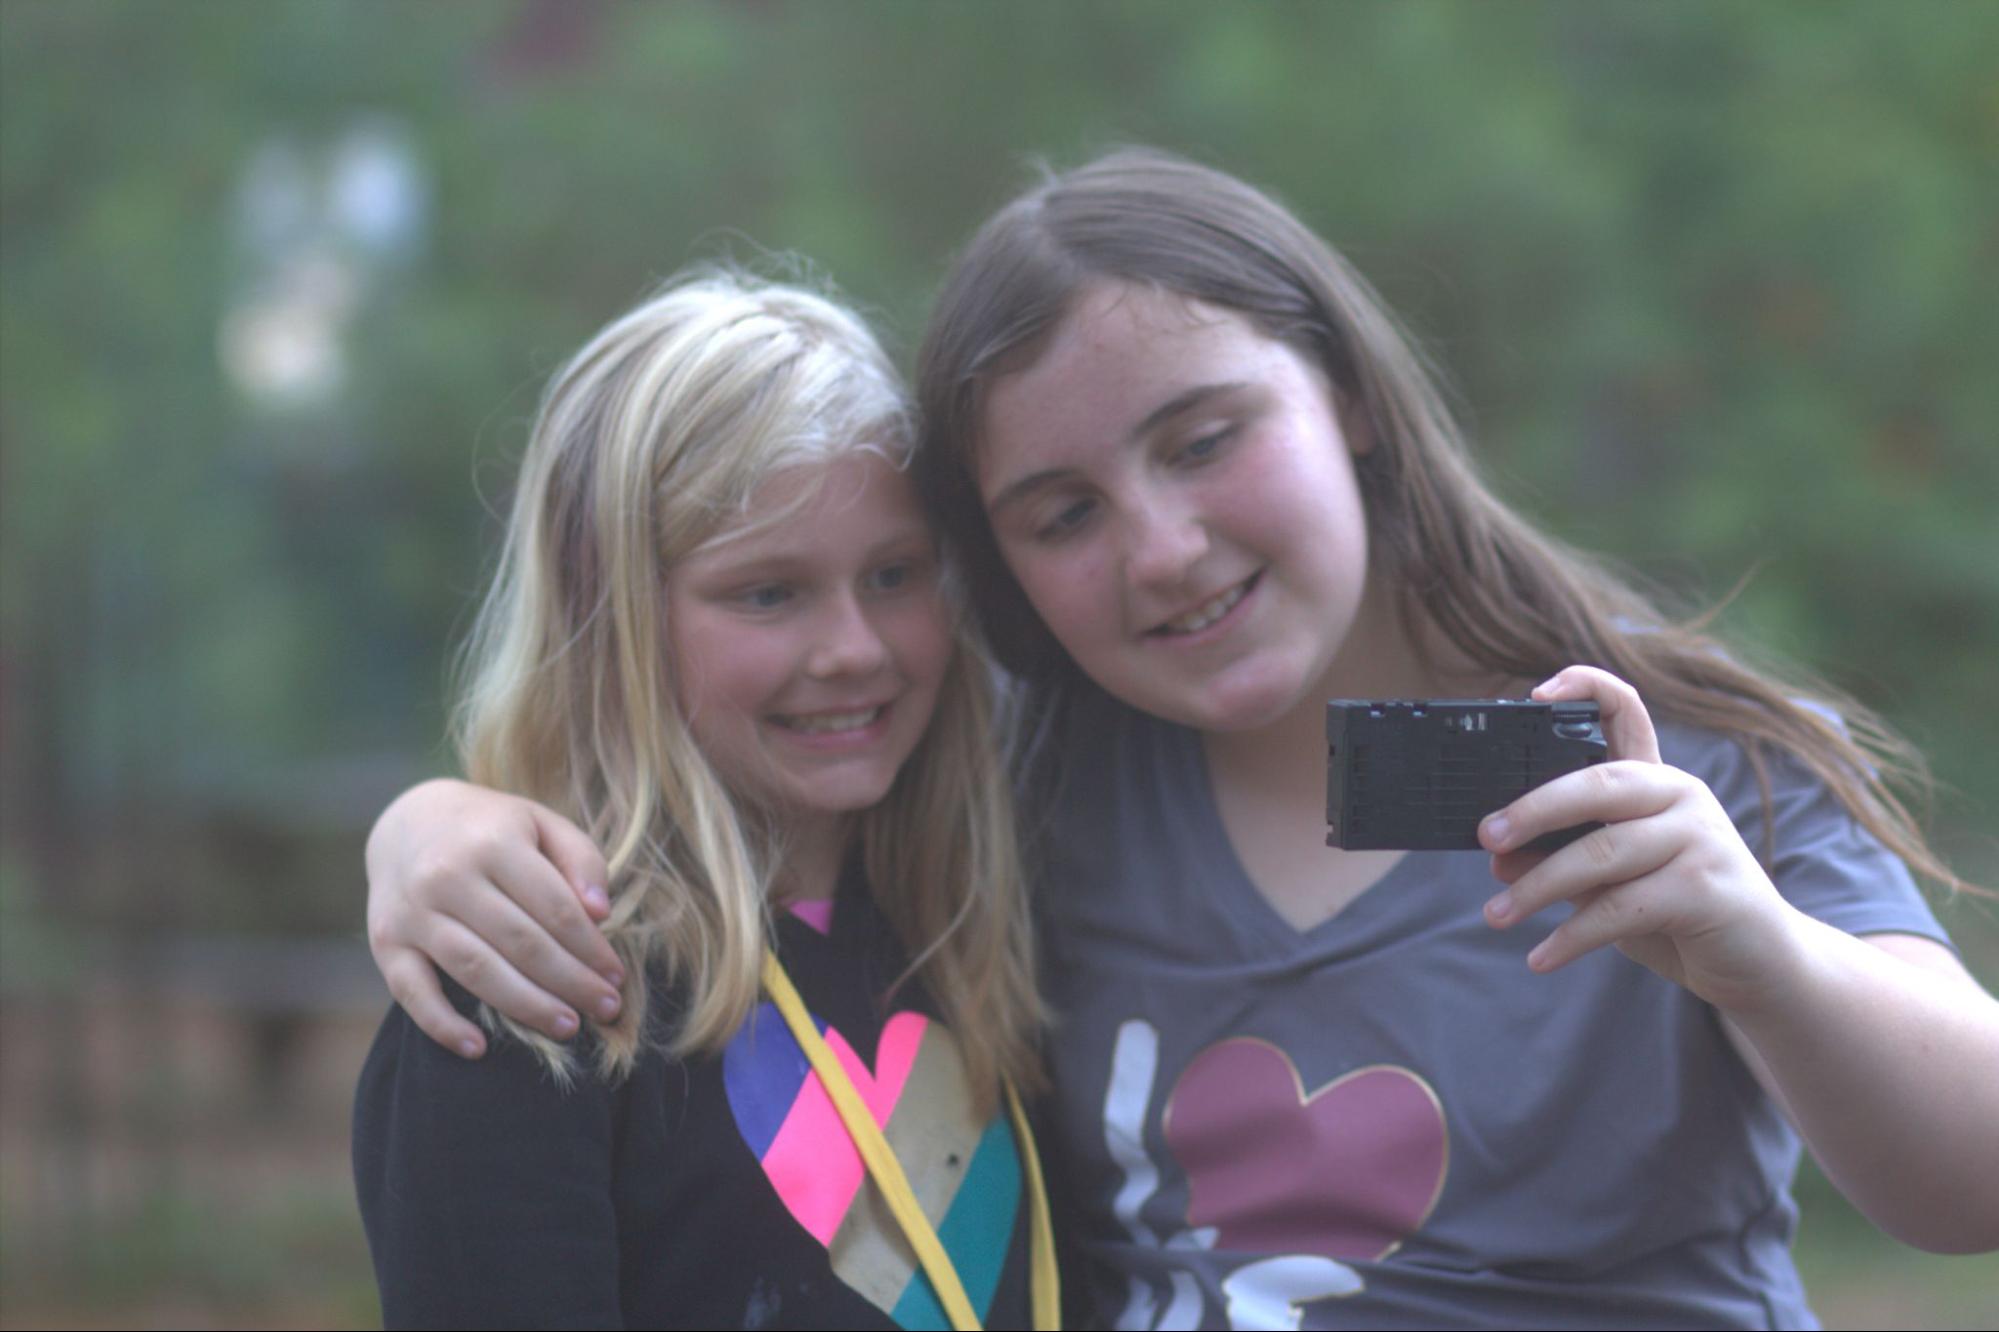 Two teen camp girls taking a selfie on a disposable camera